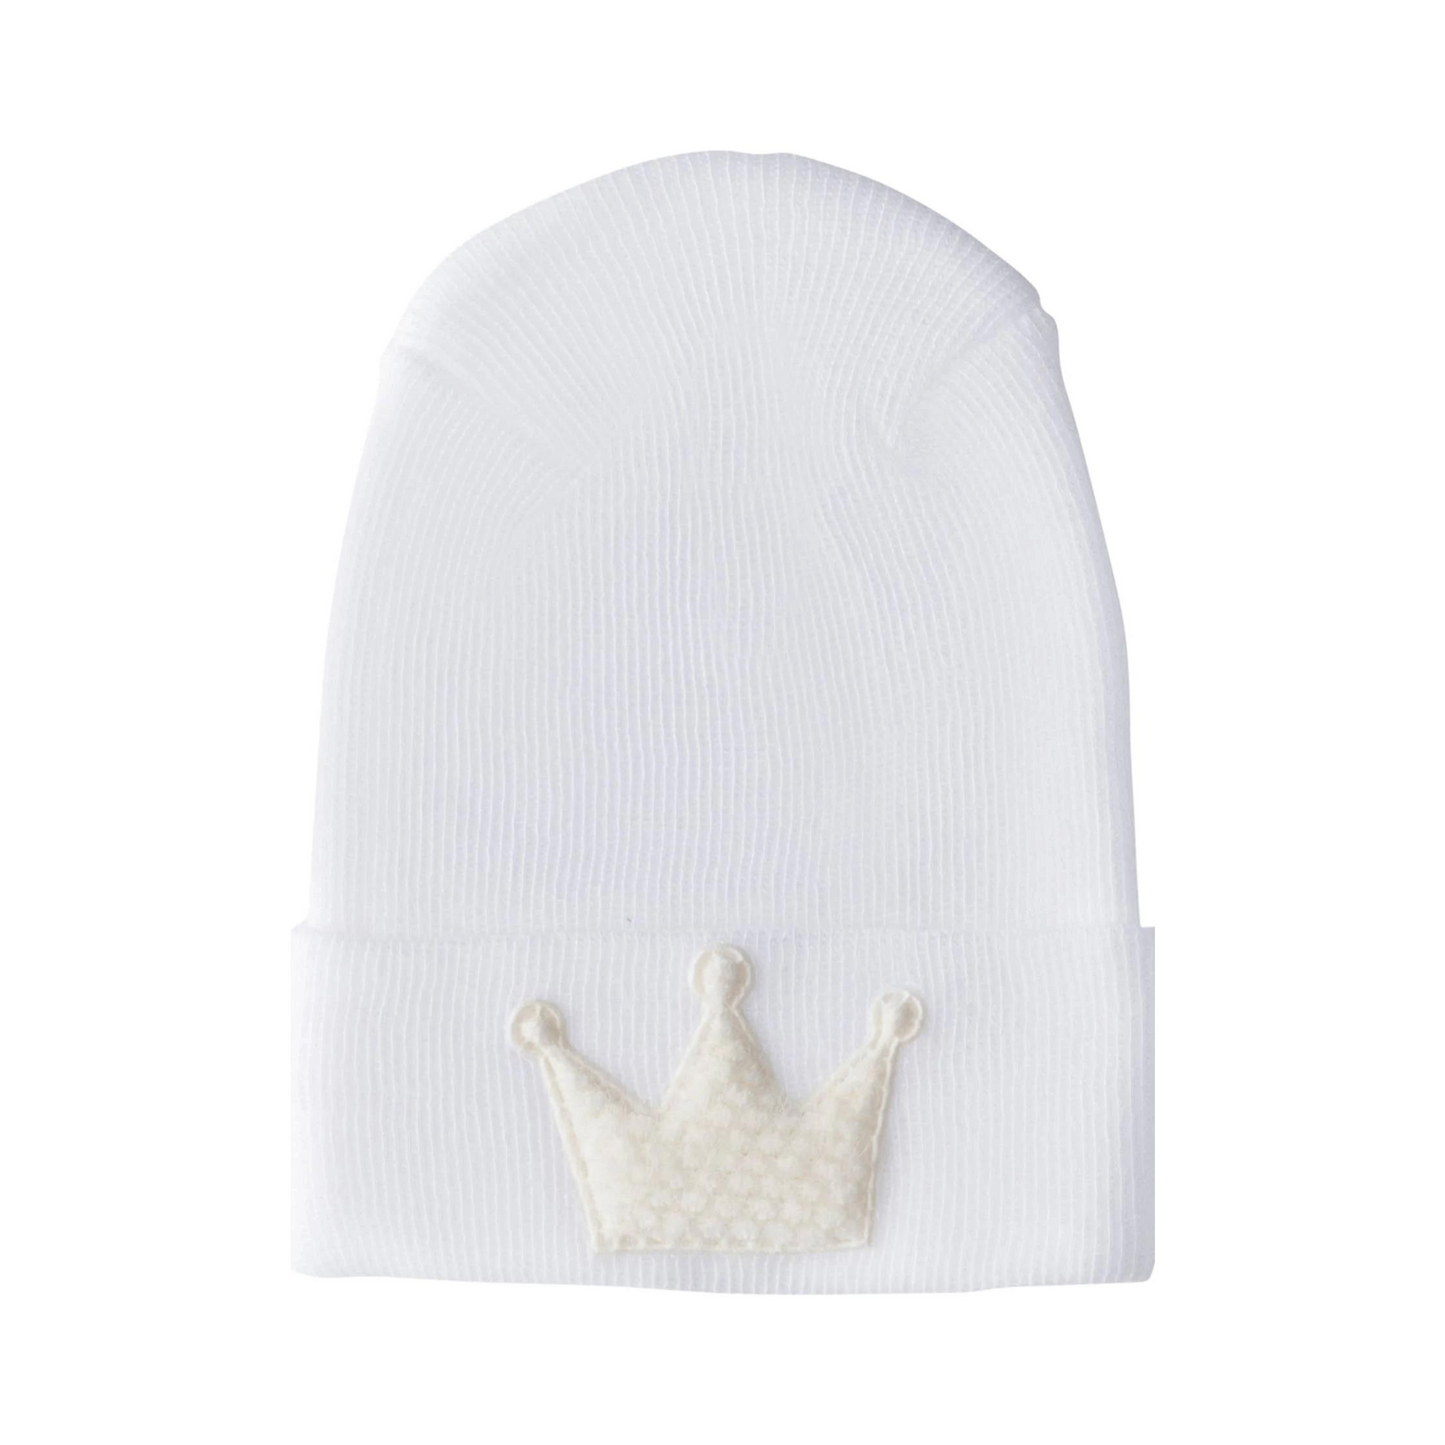 Fuzzy Ivory Crown Baby Hospital Hat